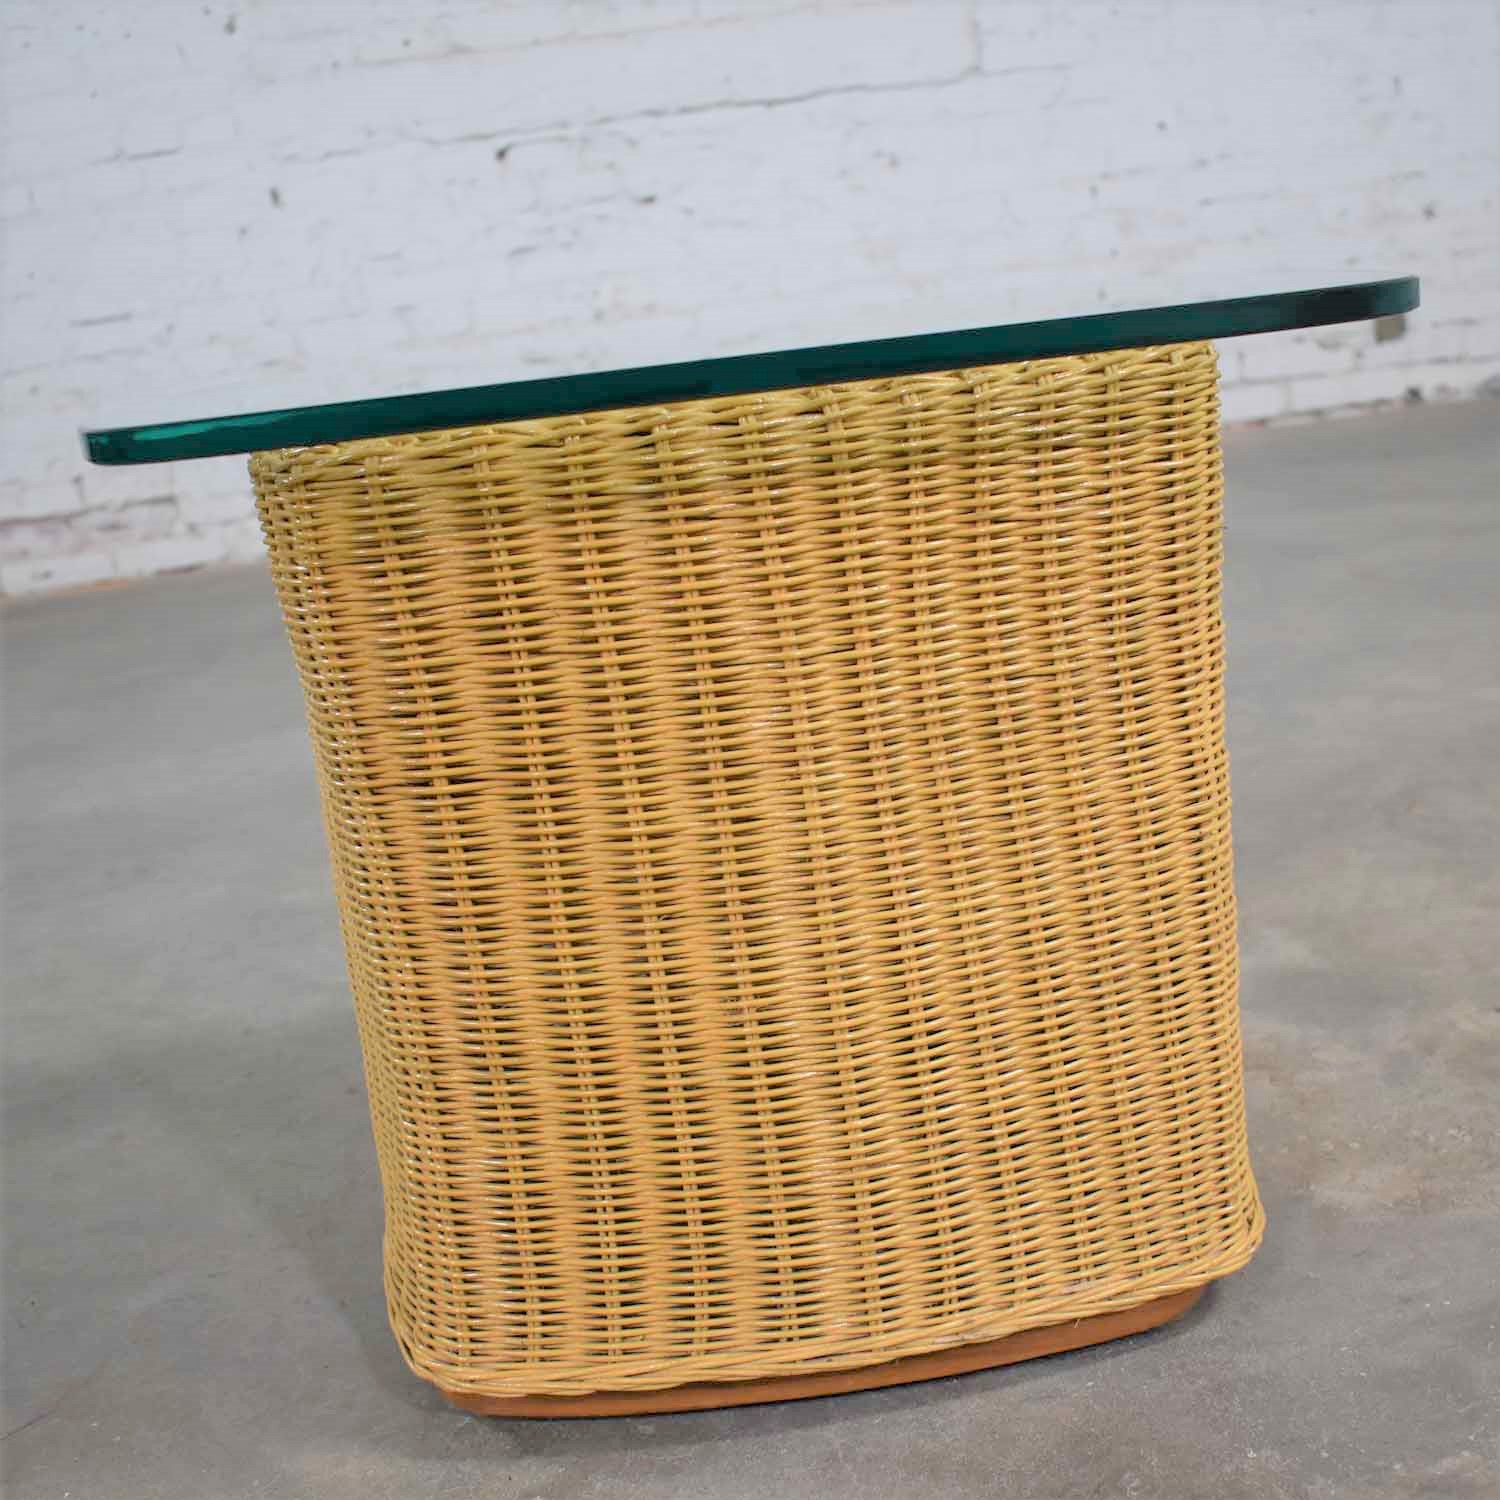 Rattan Wicker Organic Modern Side Table with Thick Glass Top